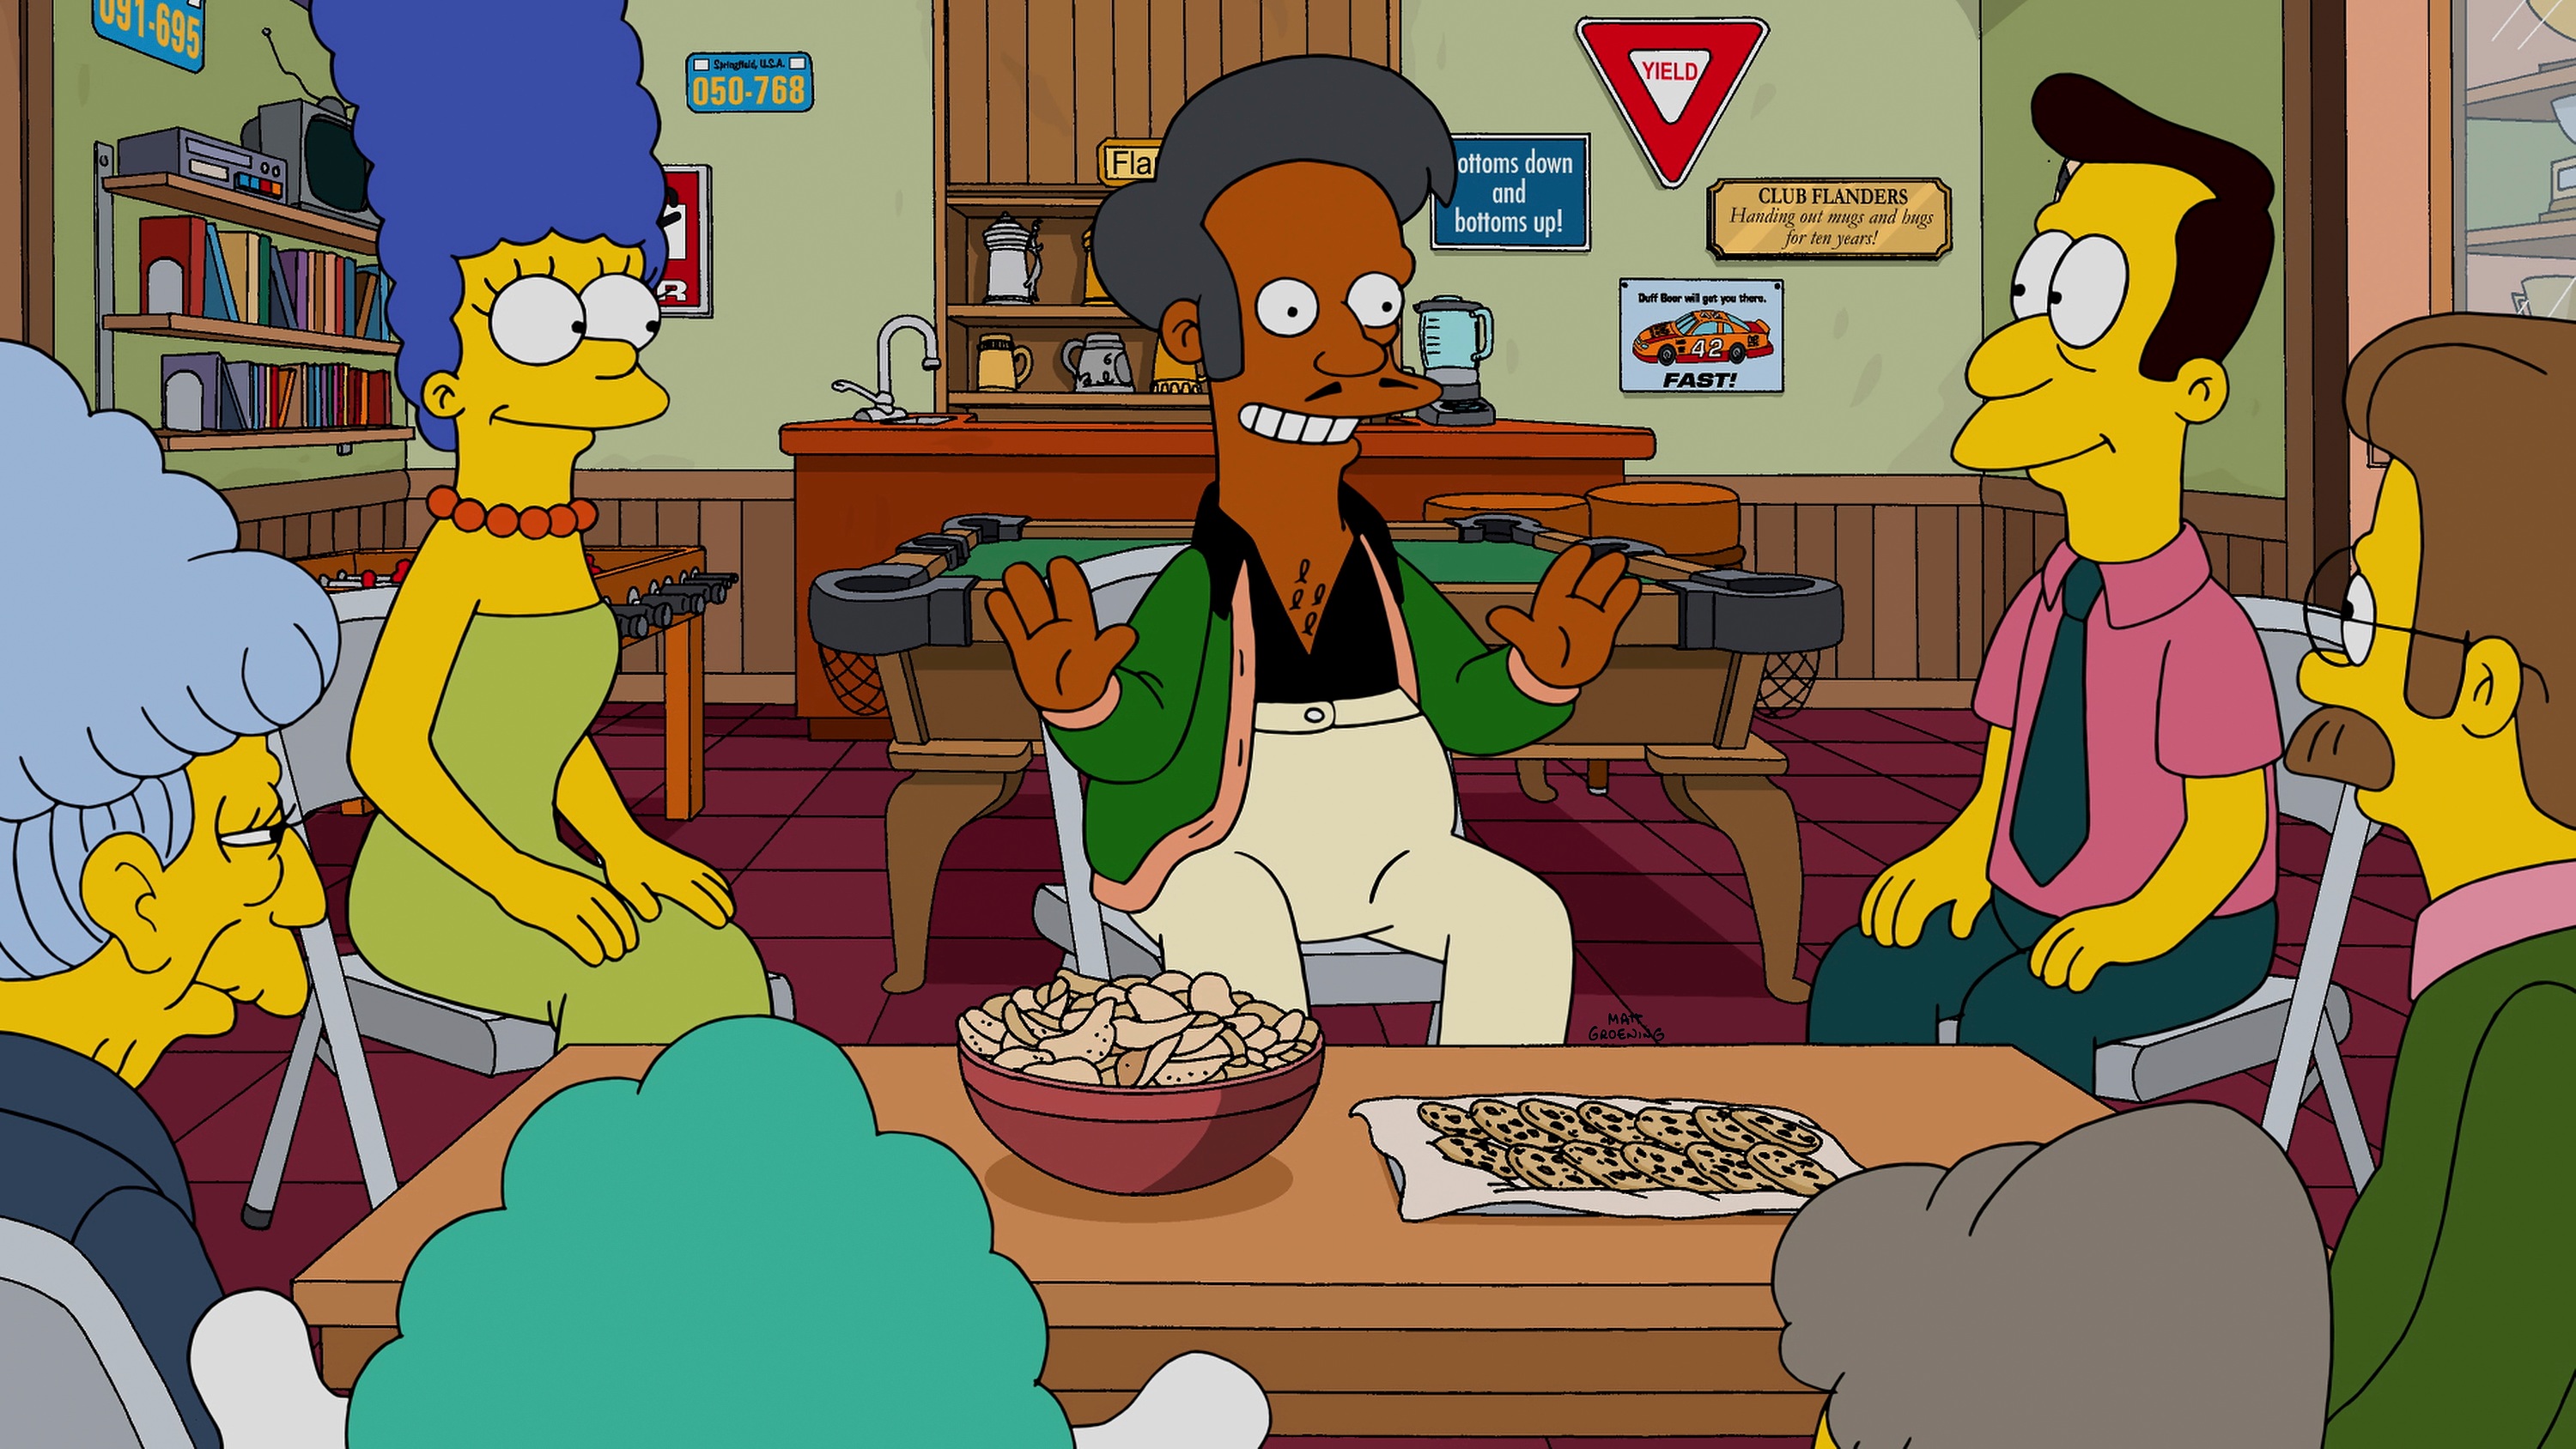 FOX's "The Simpsons" - Apu and Marge